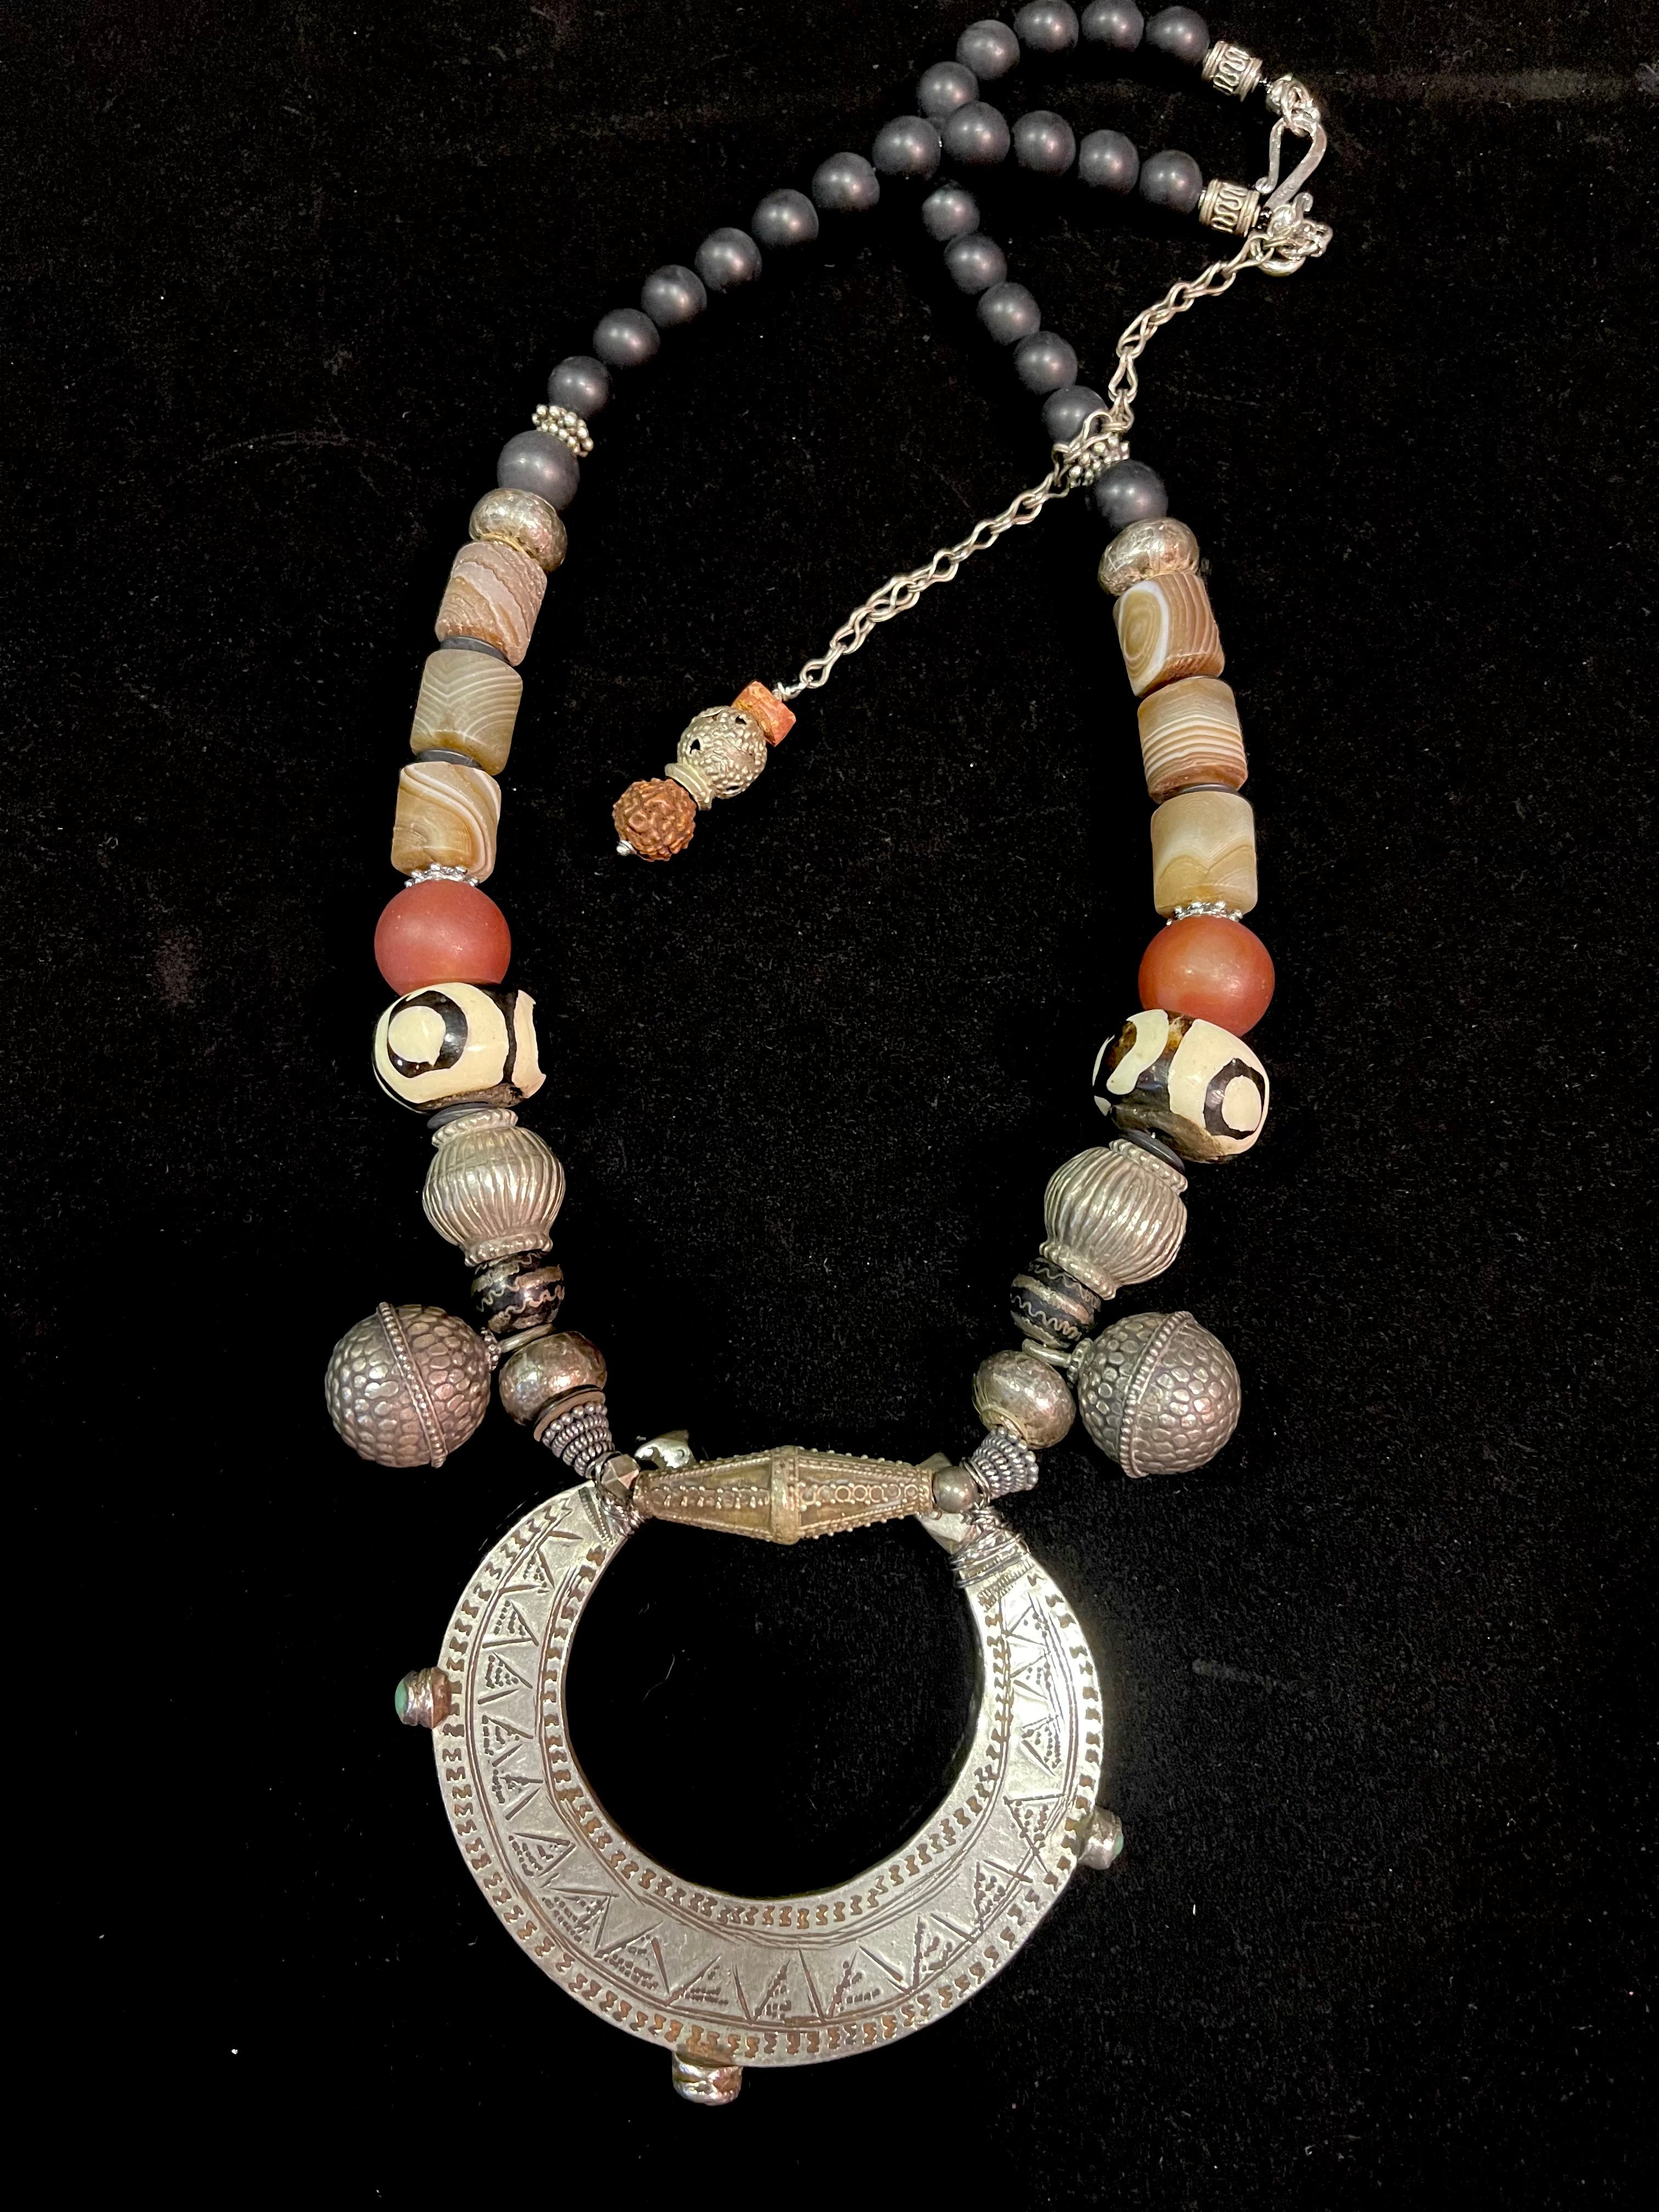 Vintage 1940s Silver Necklace from Afghanistan | Beadparadise.com